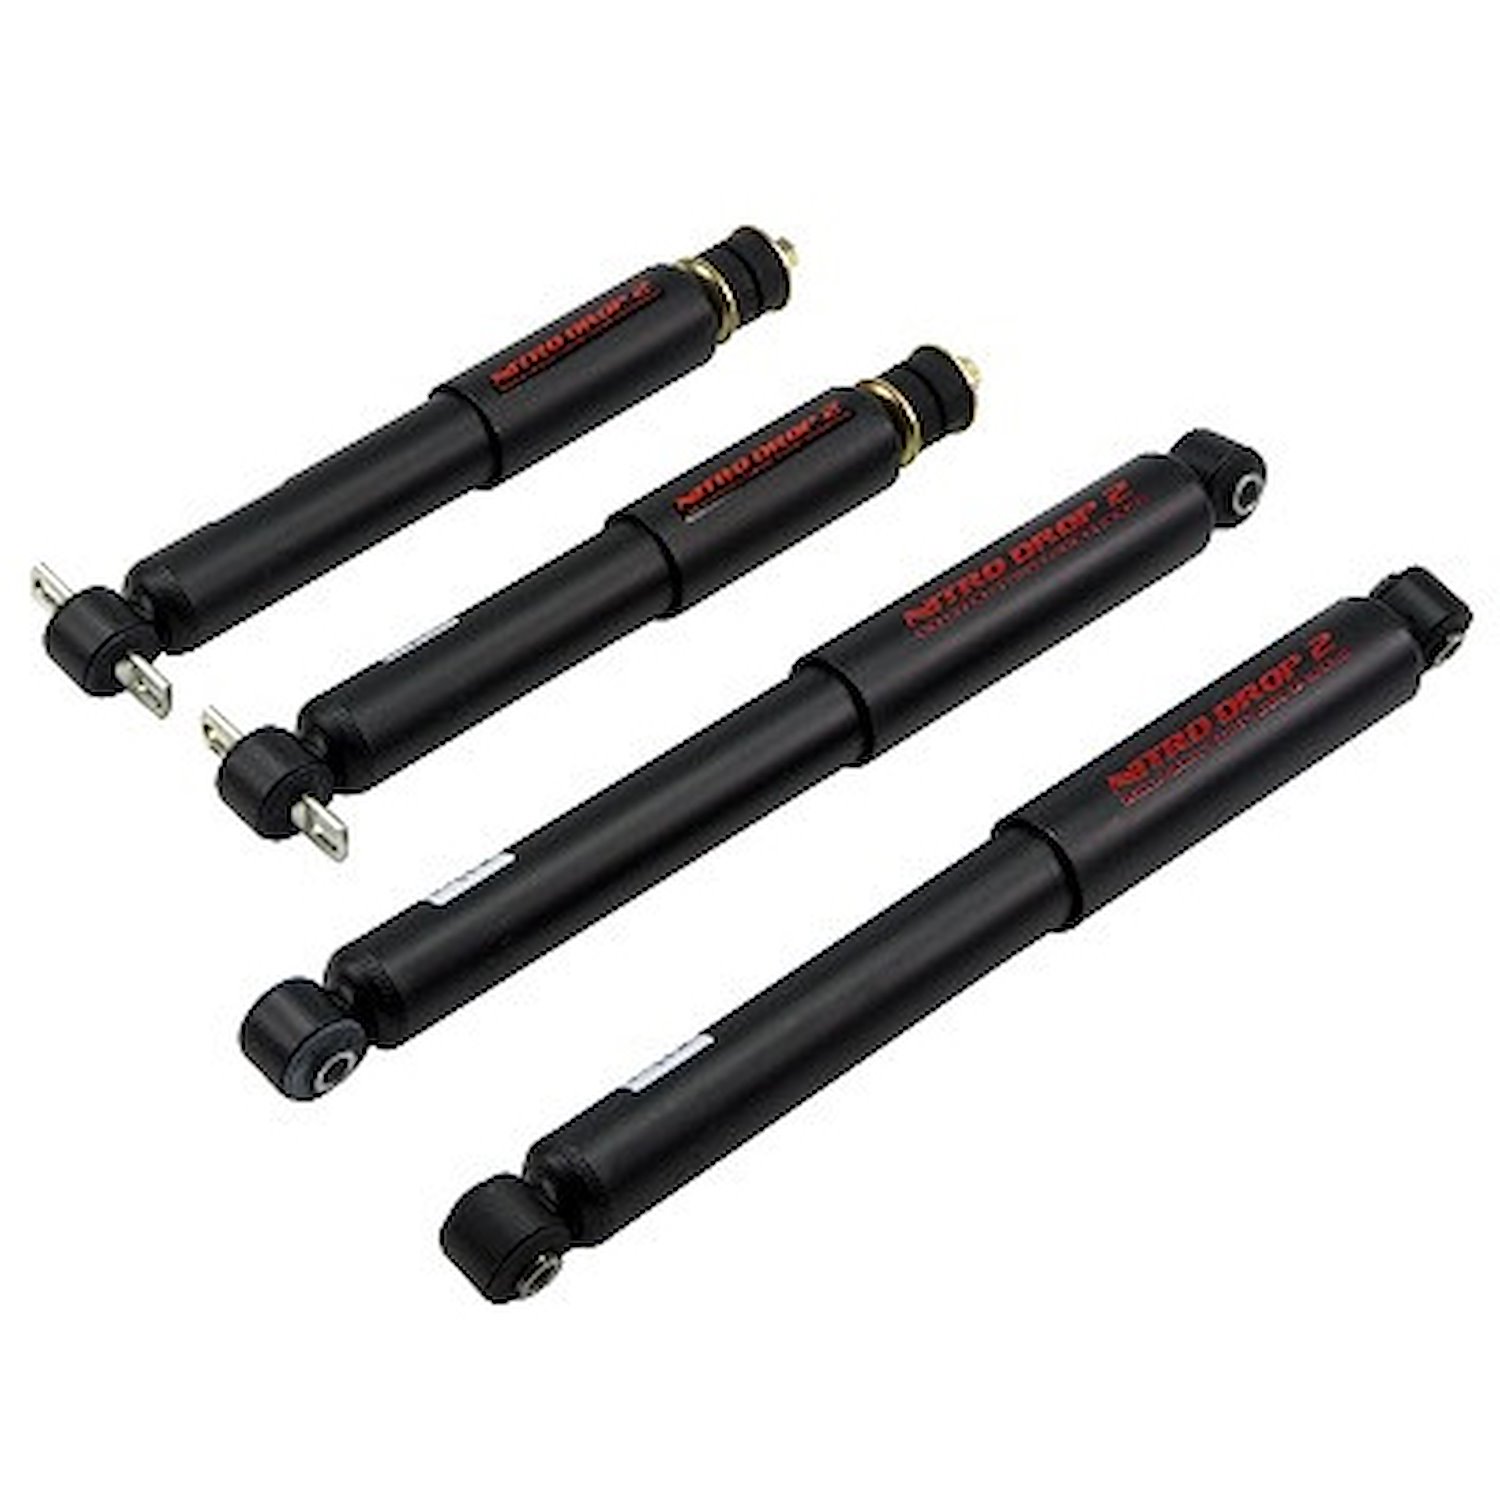 Nitro Drop 2 Shock Set for 1997-2002 Ford Expedition/Lincoln Navigator 2WD